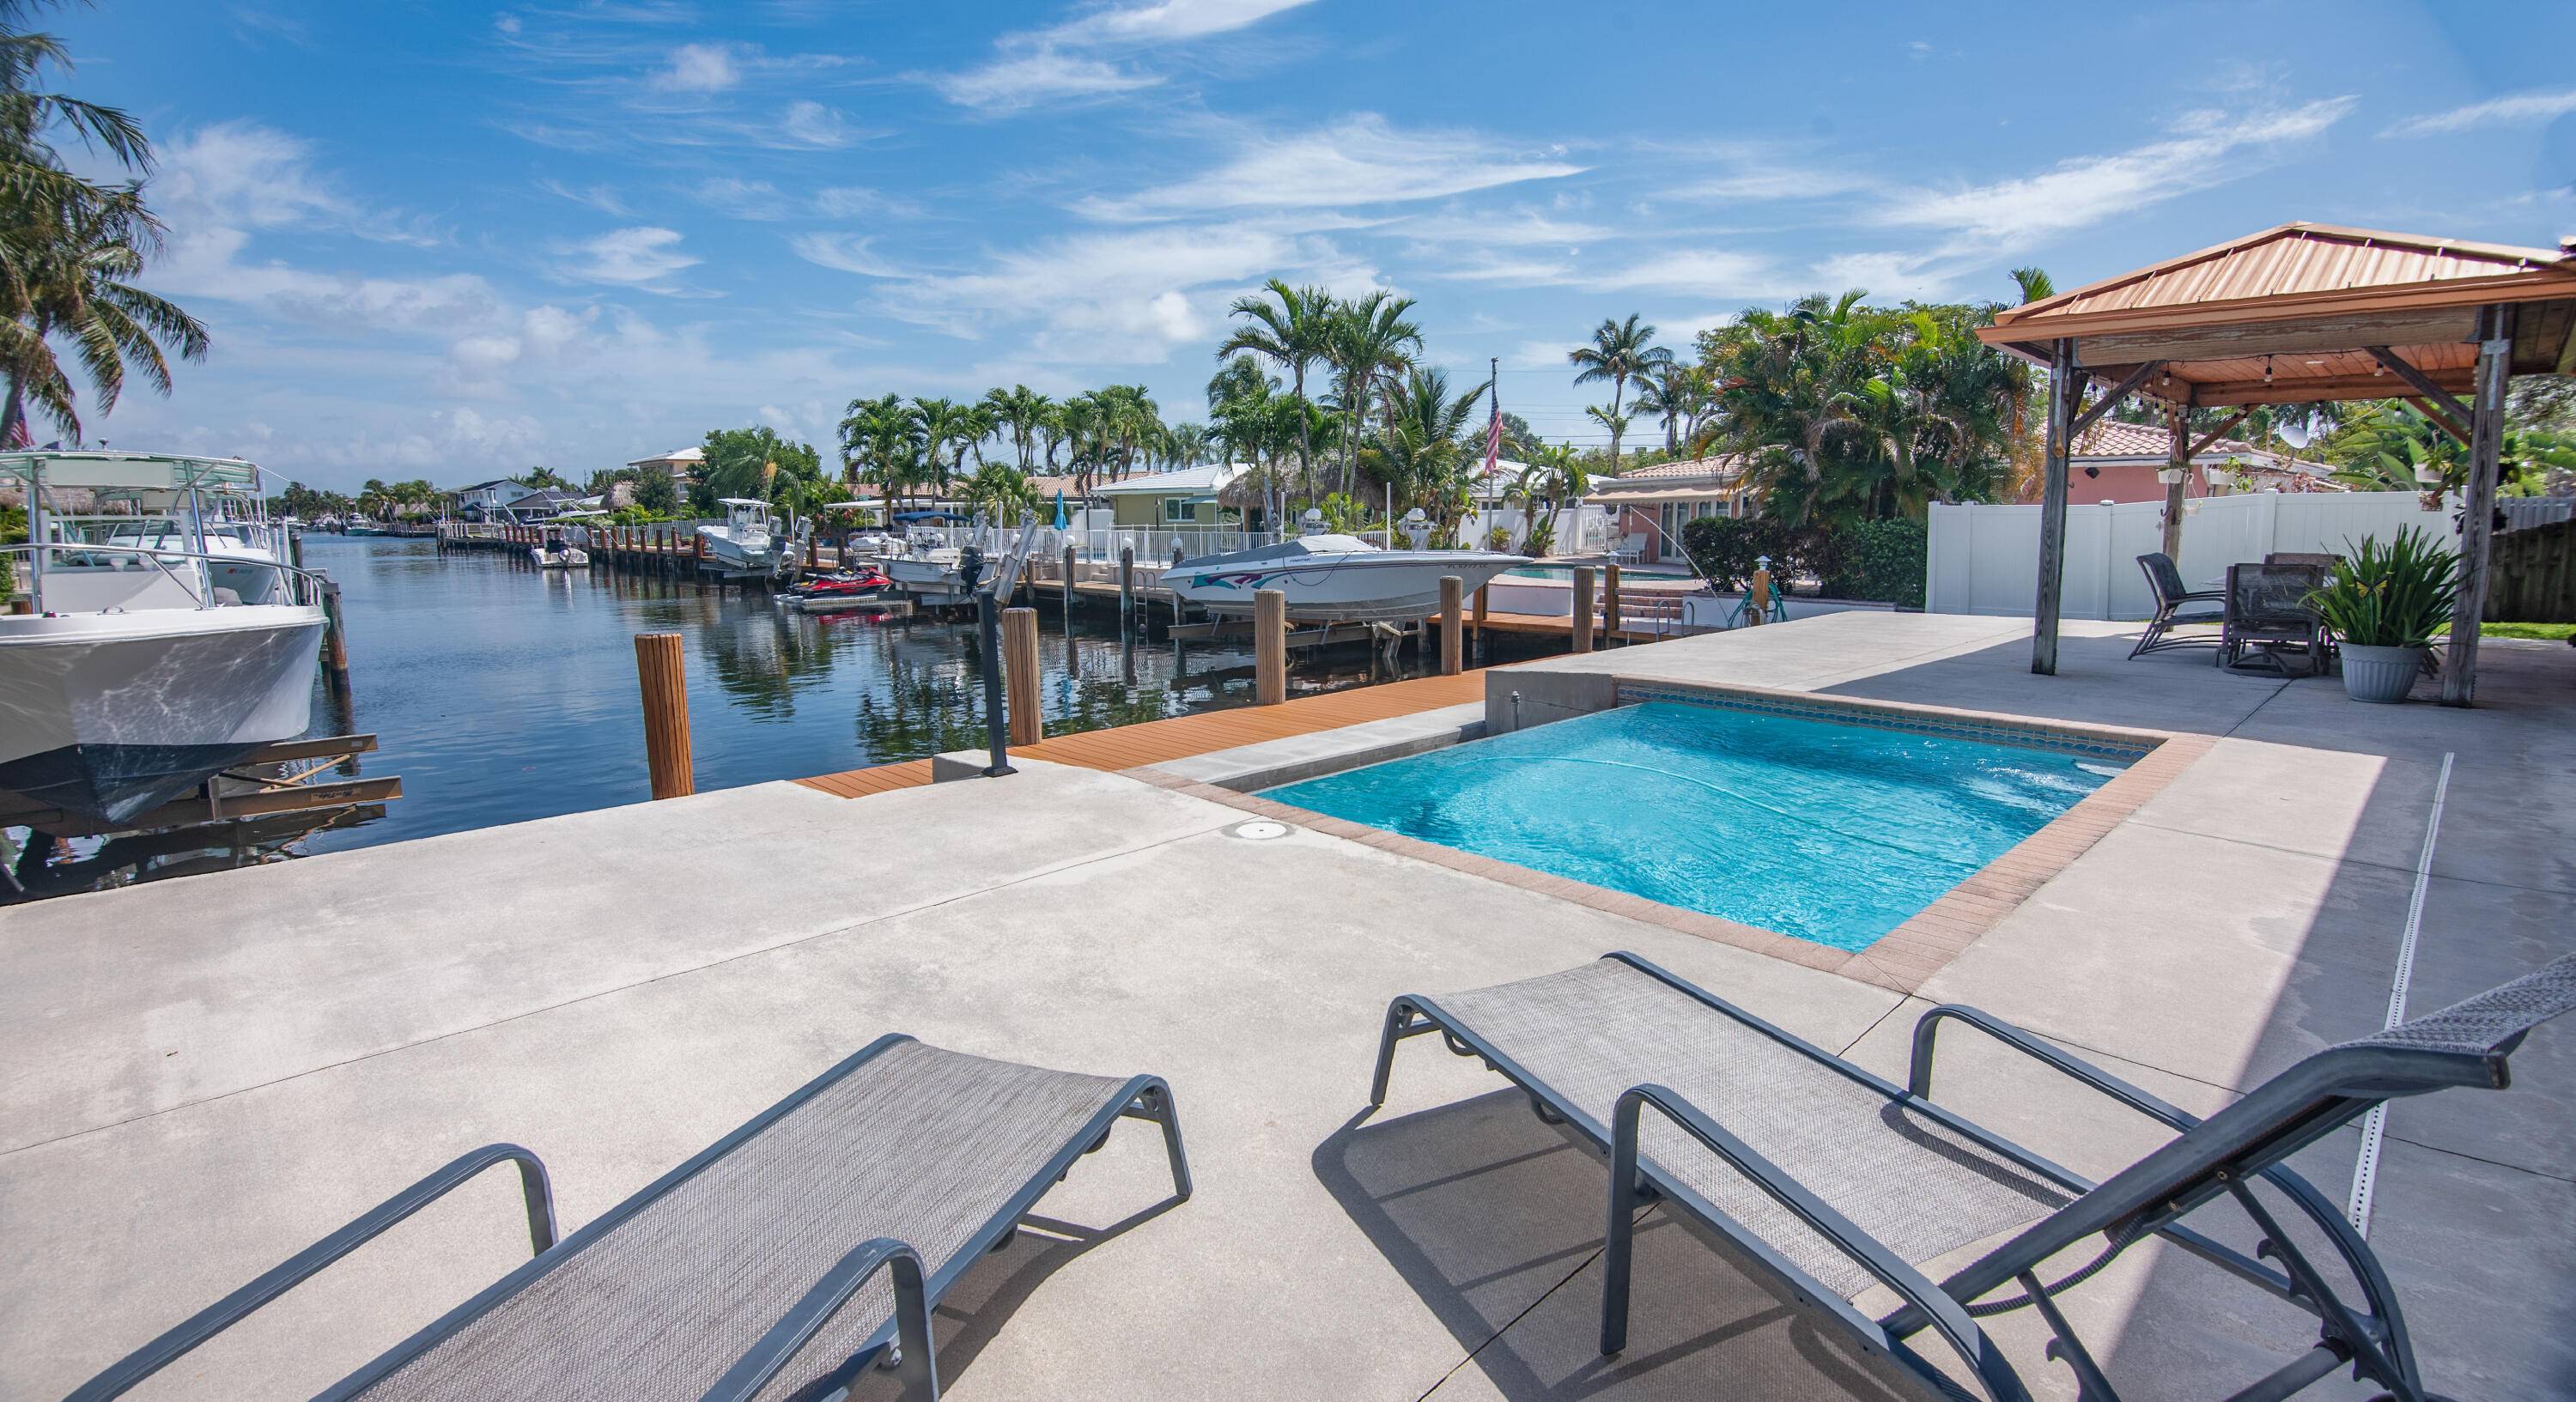 One of the most desirable neighborhoods in Pompano Beach, this 3 2 waterfront ocean access with 1 fixed bridge was built in 2007 featuring open concept living with 10' ceilings ...